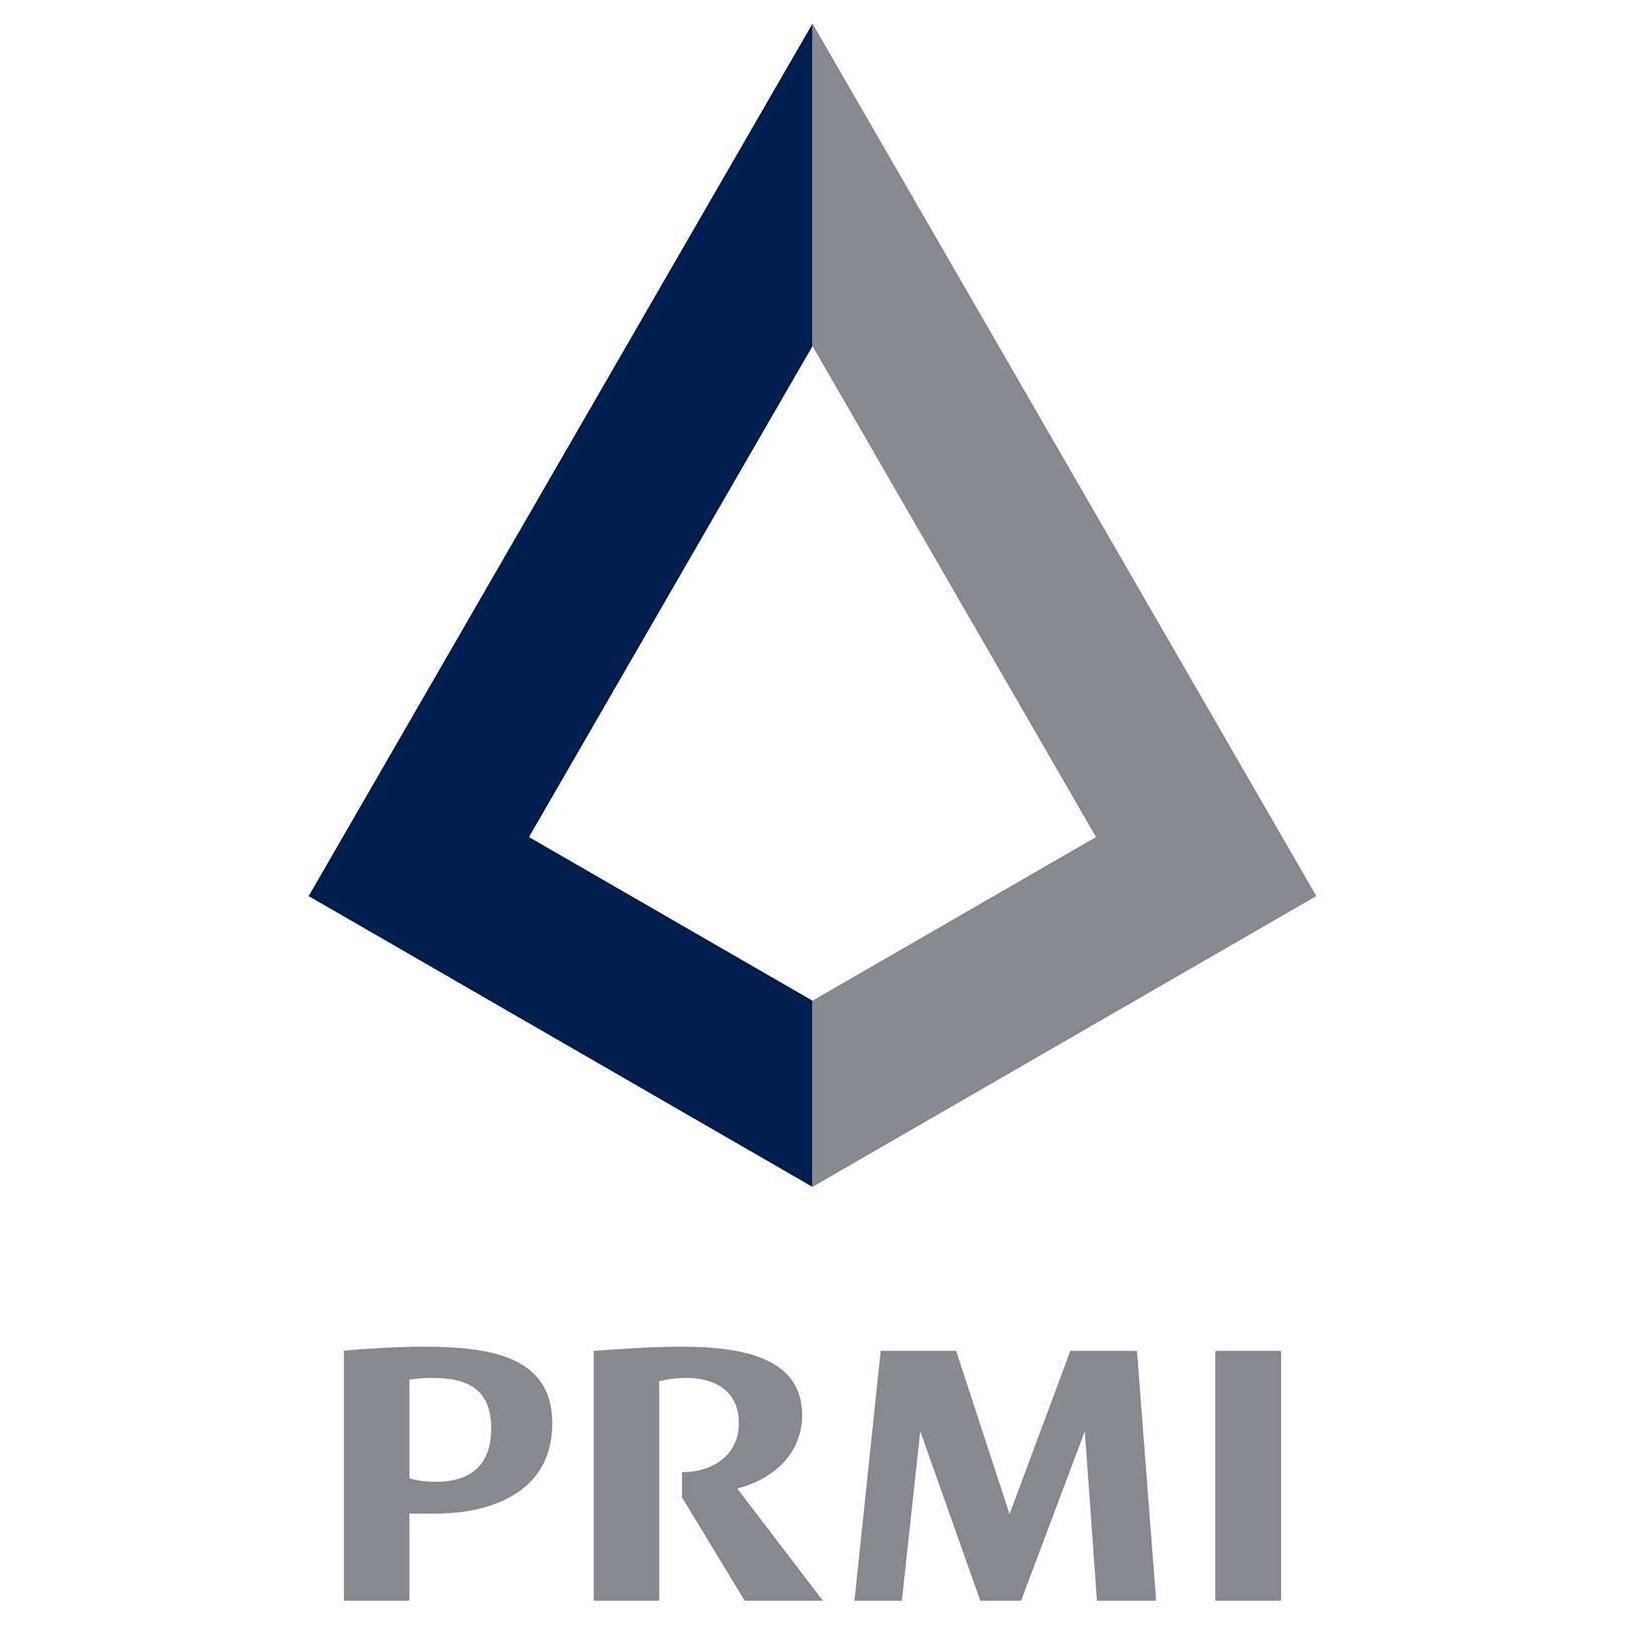 Primary Residential Mortgage, Inc. Logo